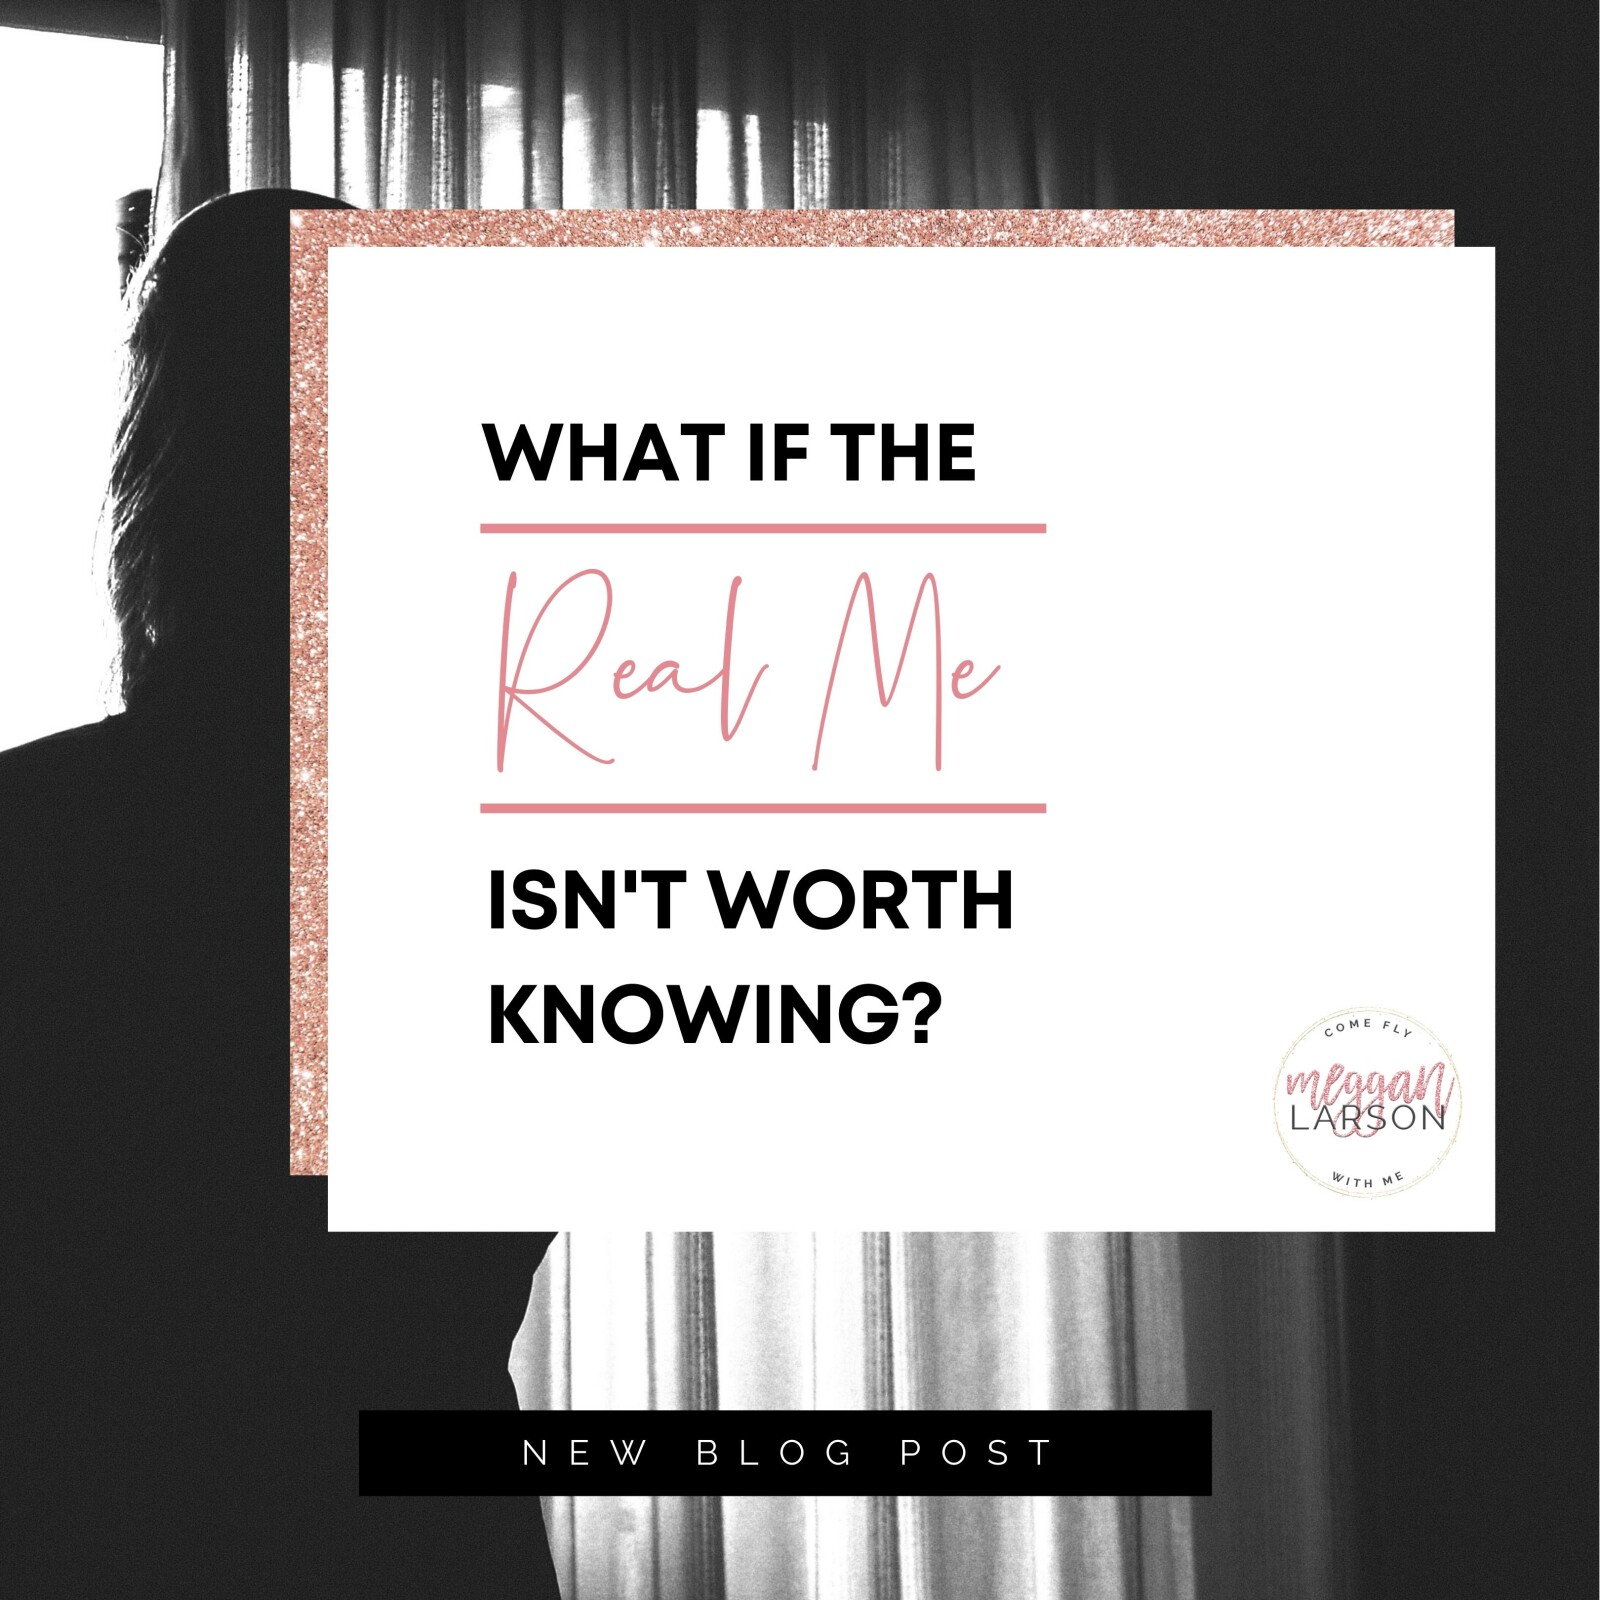 What If The Real Me Isn’t Worth Knowing?